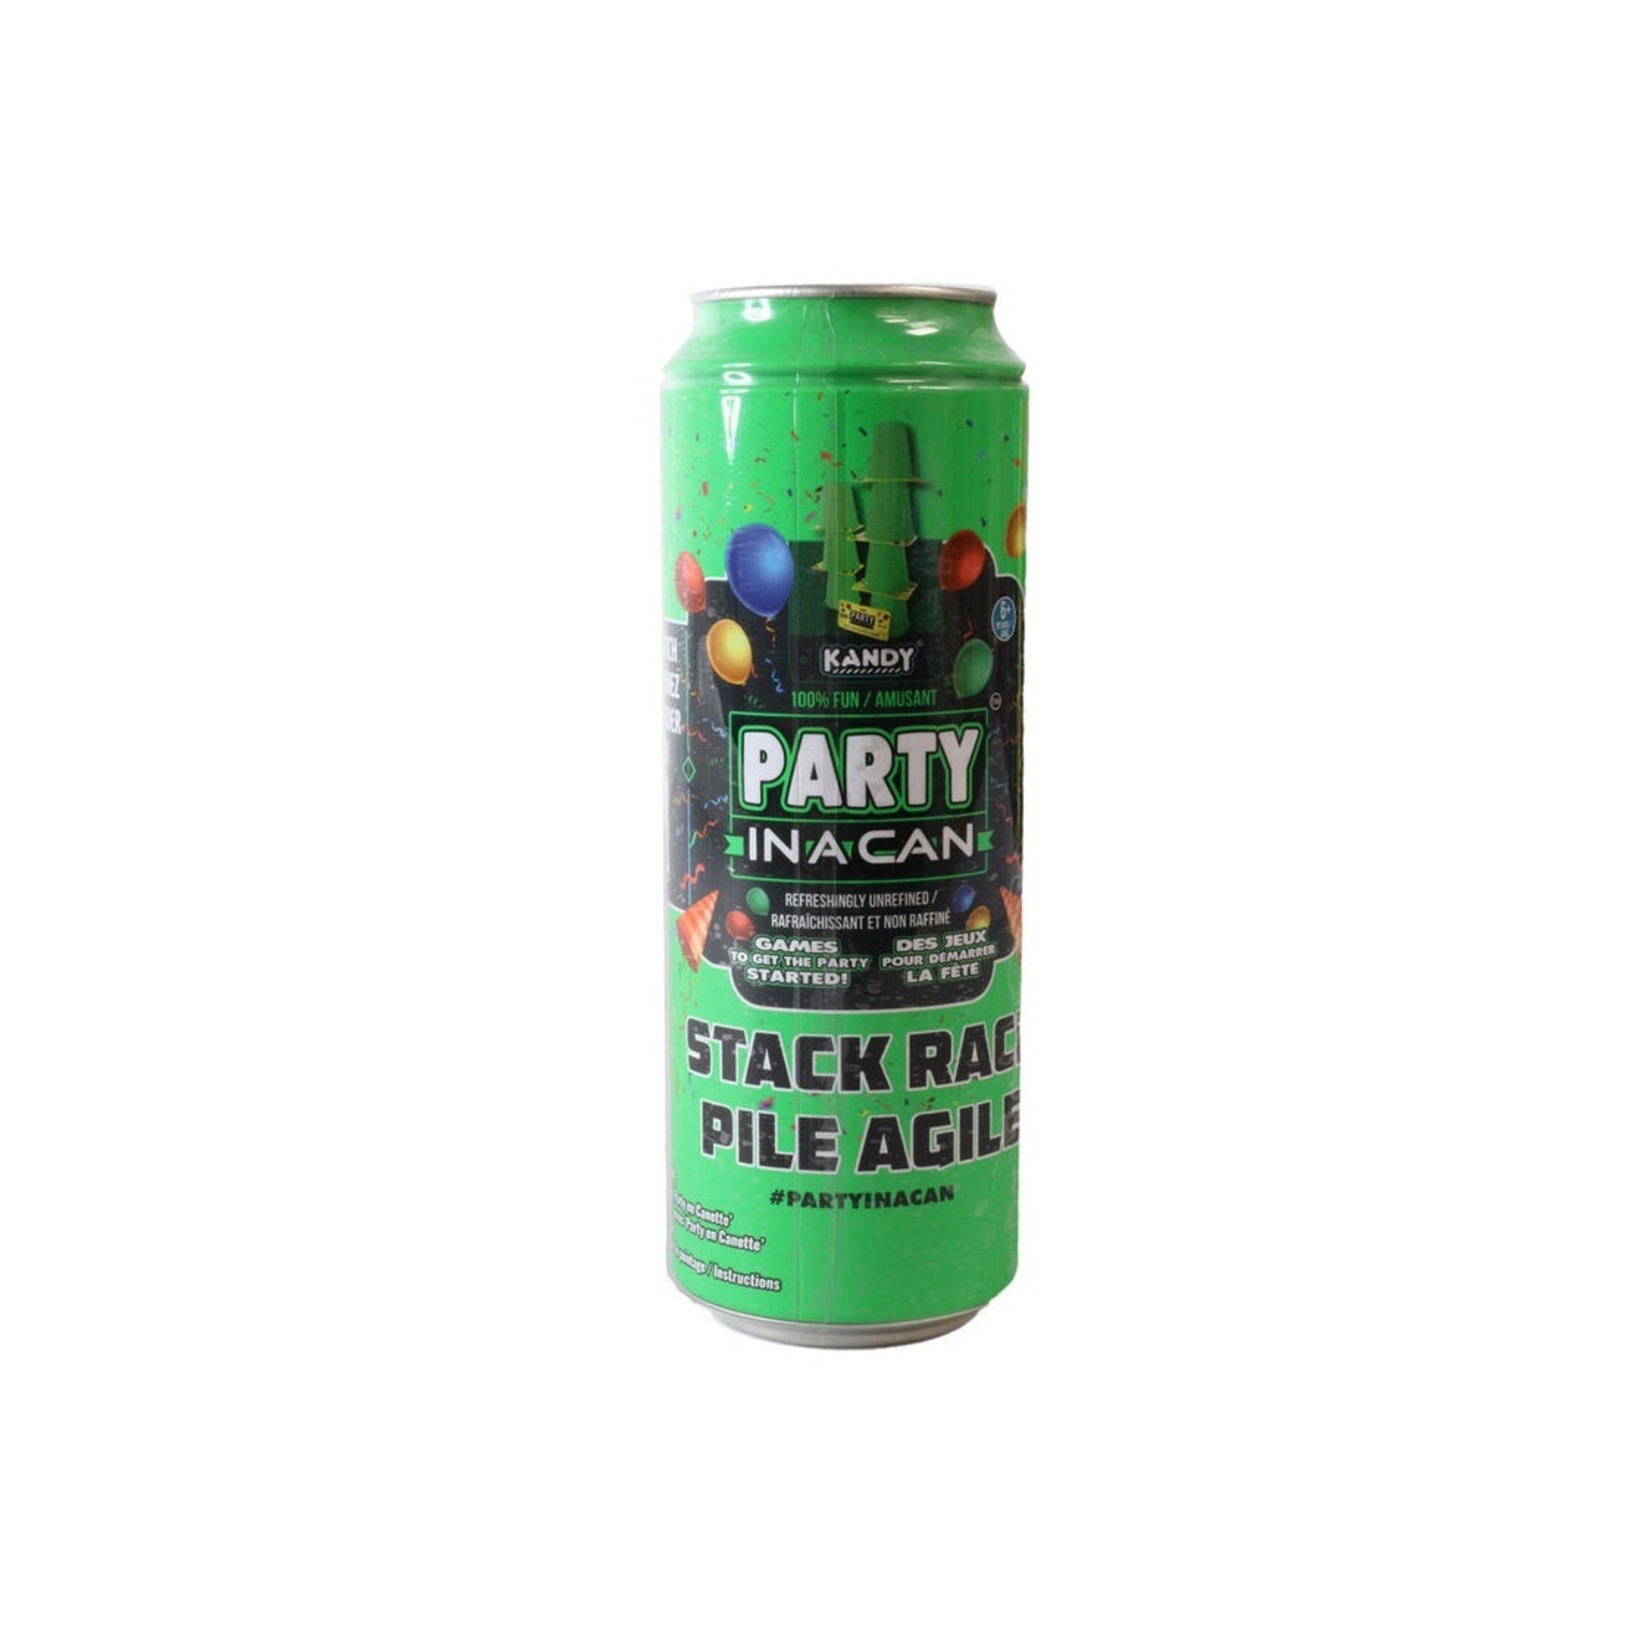 Party in a can - Pile agile (Multilingue)